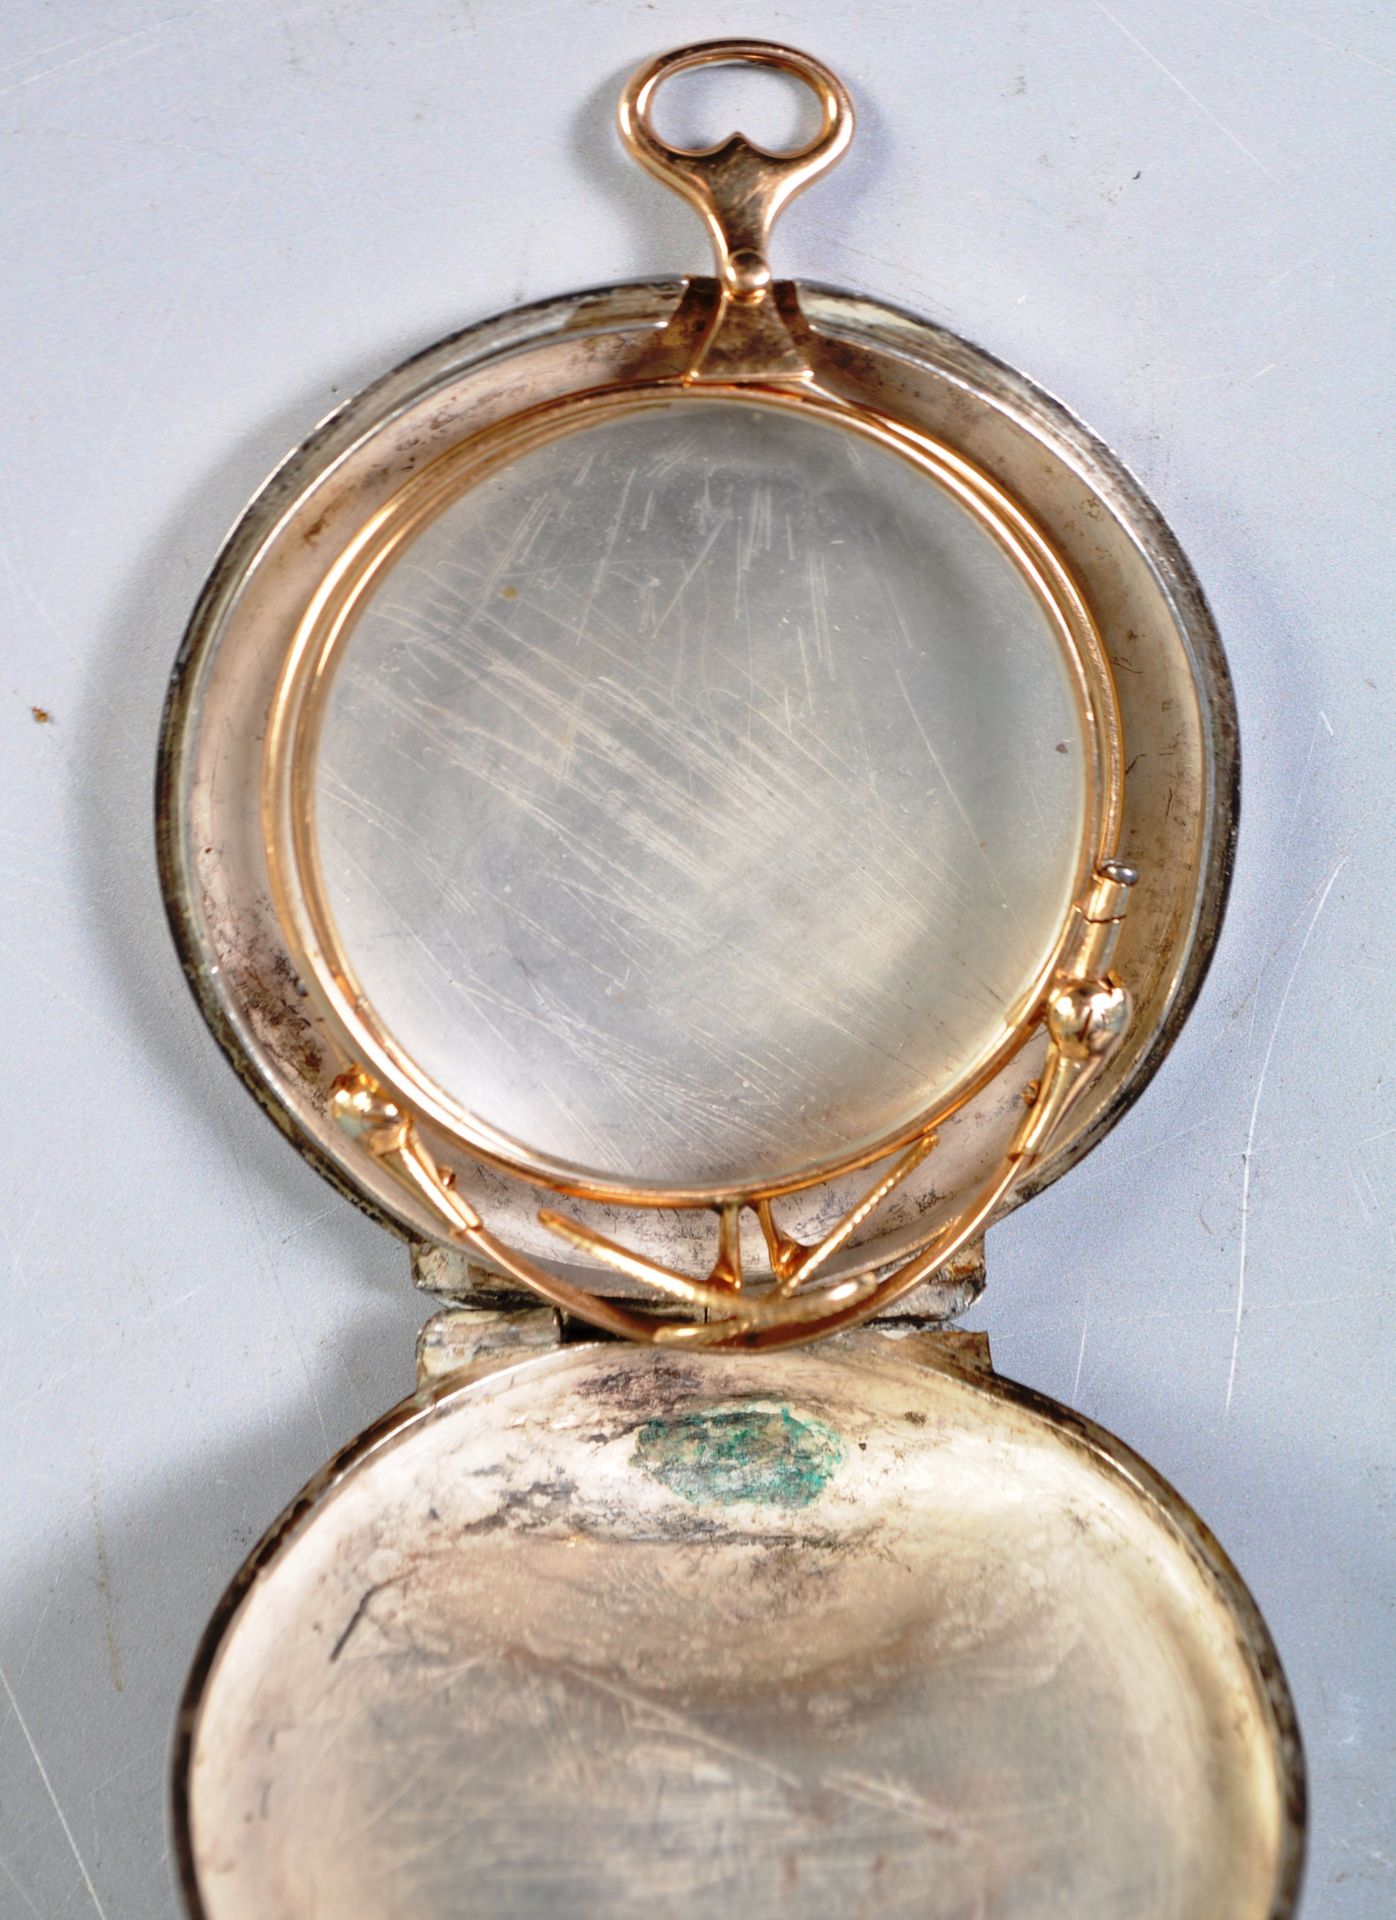 EARLY 20TH CENTURY GOLD LORGNETTE WITHIN A SILVER CASE - Image 5 of 7